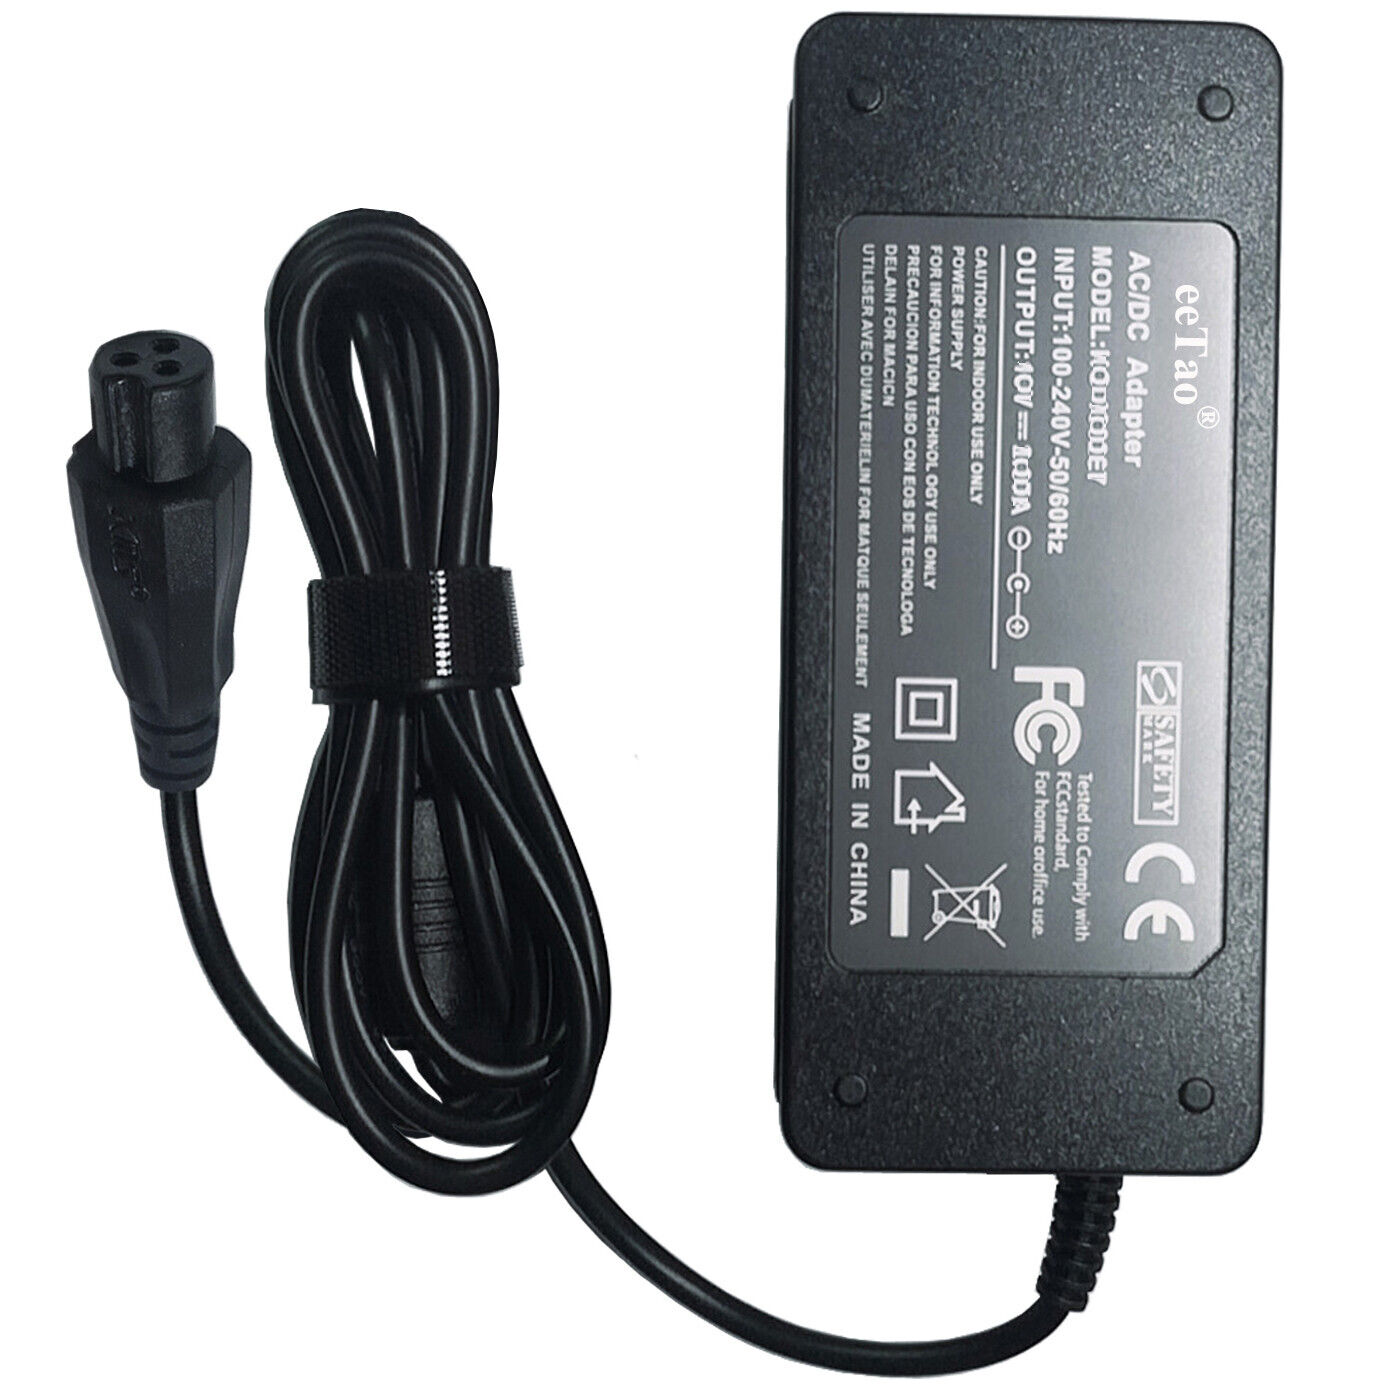 42V AC/DC Adapter For Swagtron T3 89717 Hands Free Smart Board JY-T3 Hoverboard